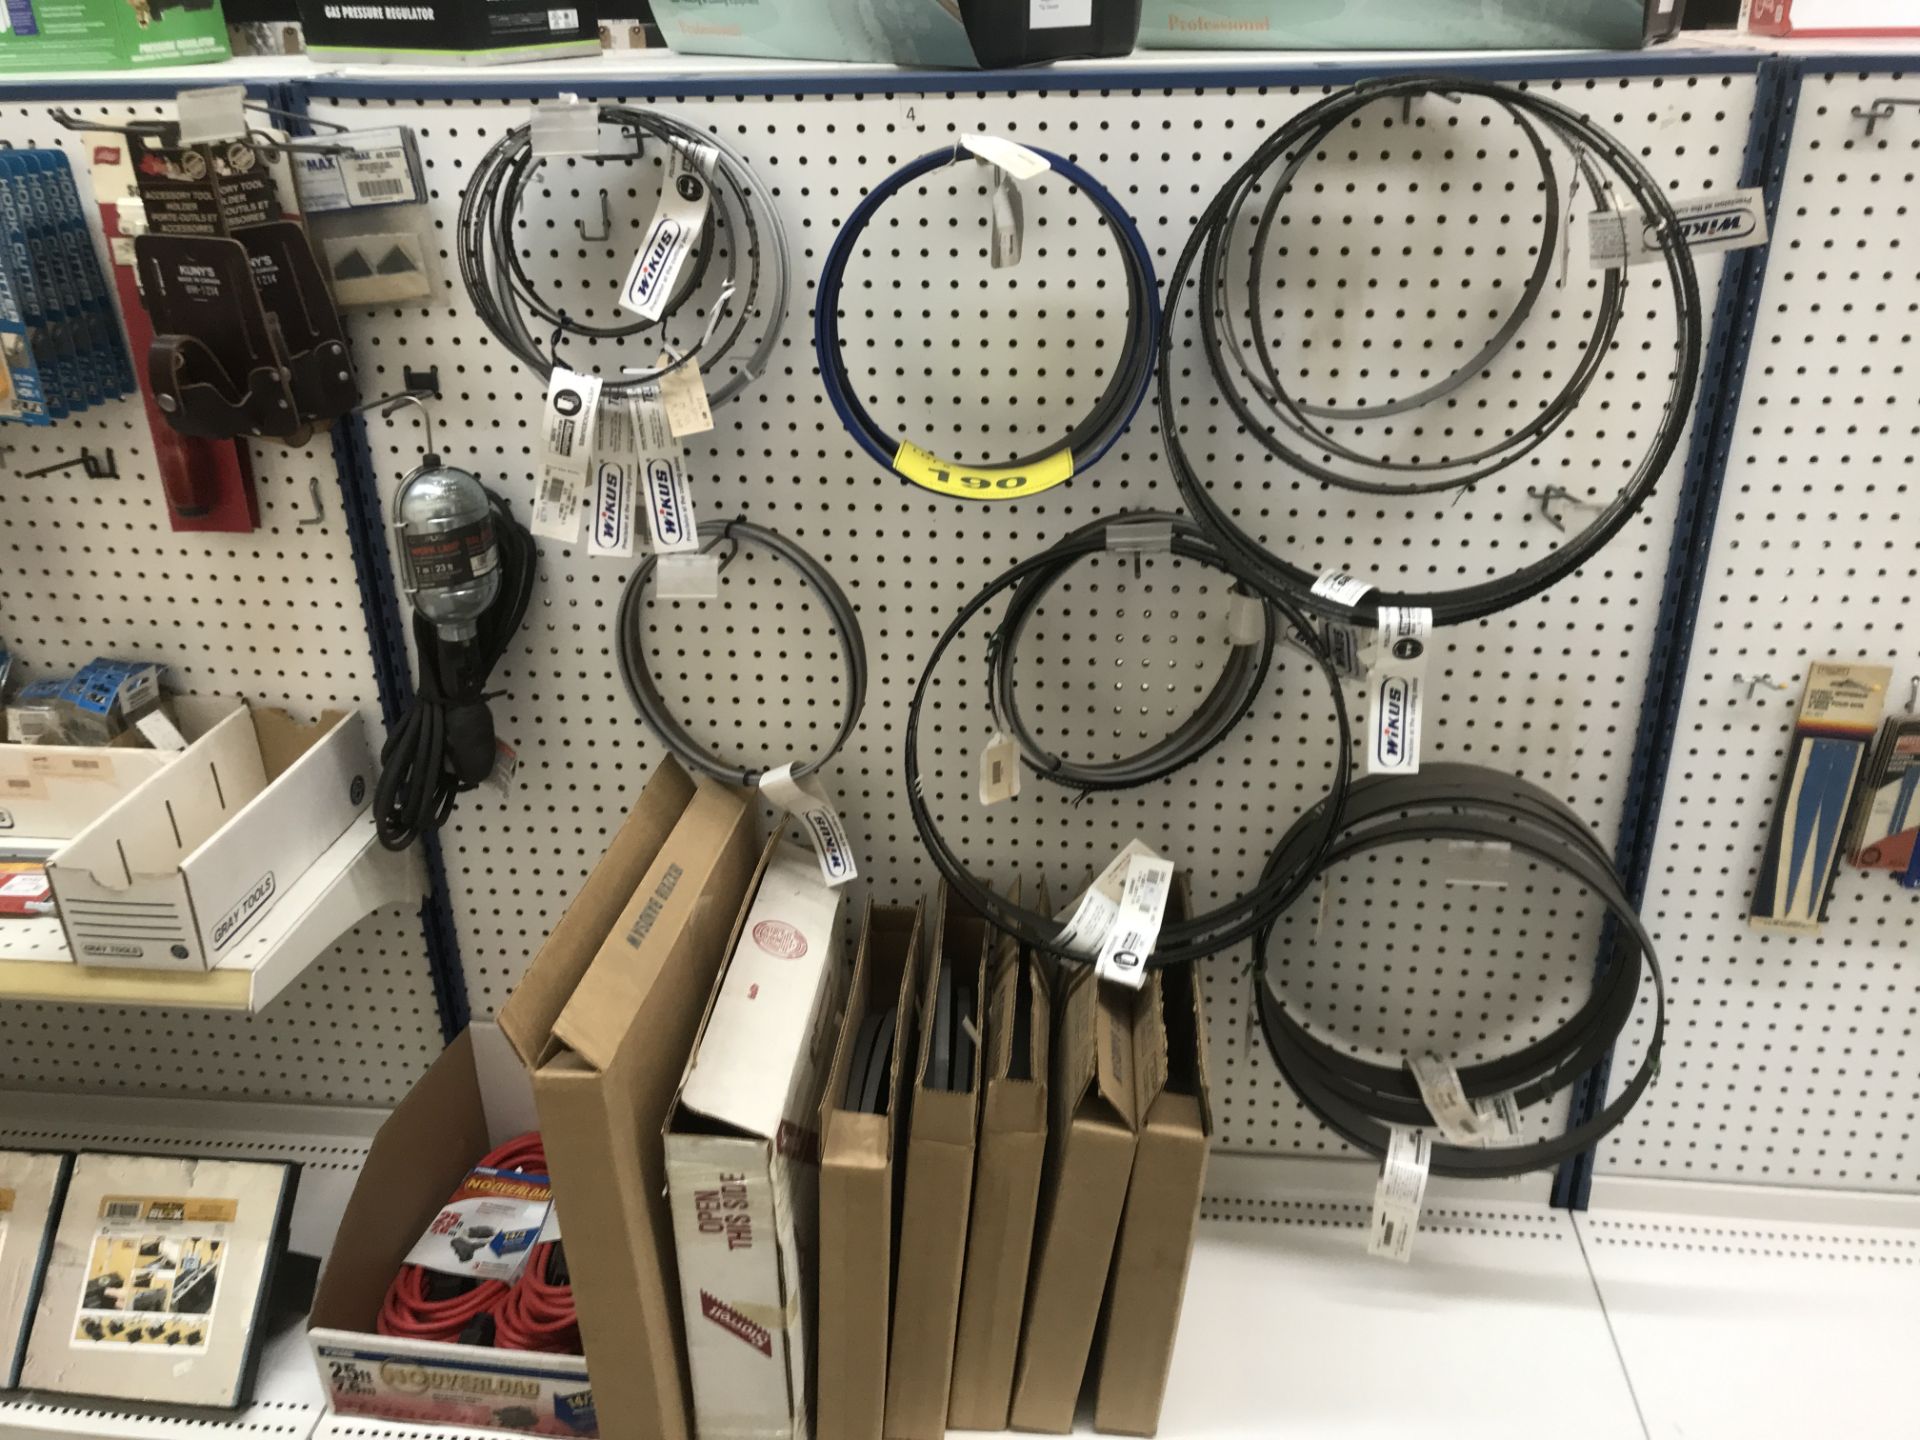 CONTENTS OF (1) SECTION PEG BOARD DISPLAY INCLUDING BANDSAW BLADES, EXTENSION CORDS, LAMP, ETC. (